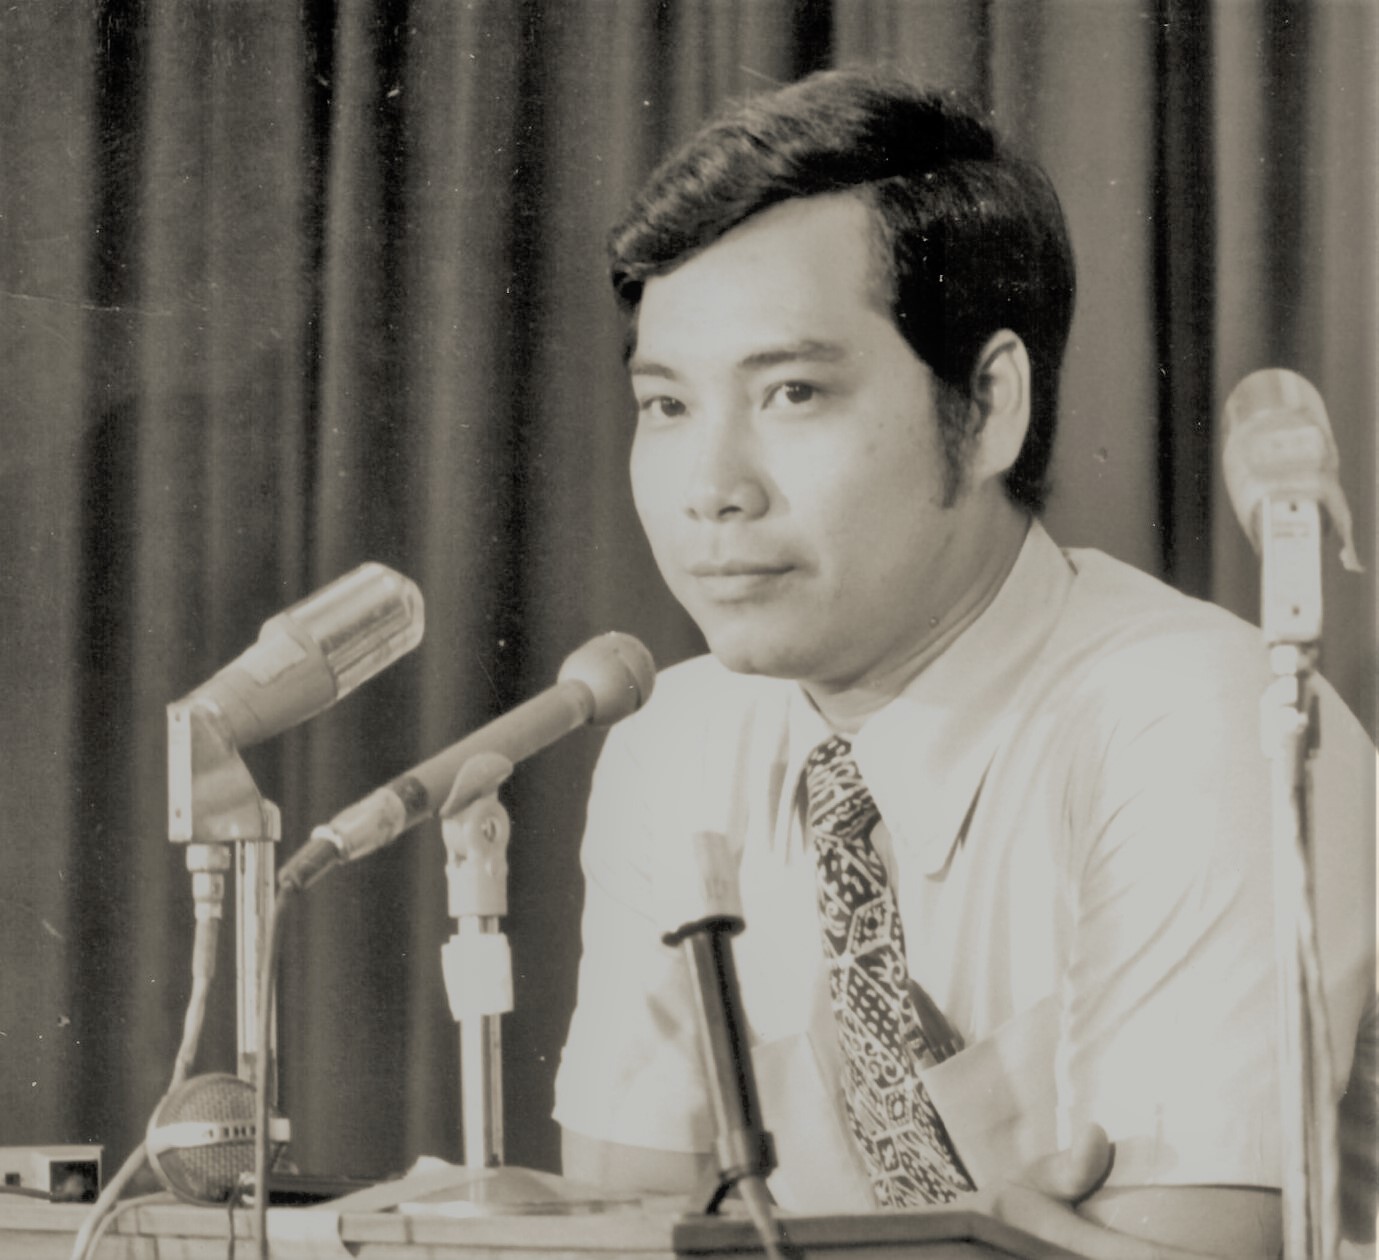 Senator Thanh Hai Ngo takes questions at the Vietnam Press Centre in Saigon in the early 1970s. He was a diplomat and press attaché for the South Vietnamese government. (Photo credit: Office of Senator Thanh Hai Ngo)